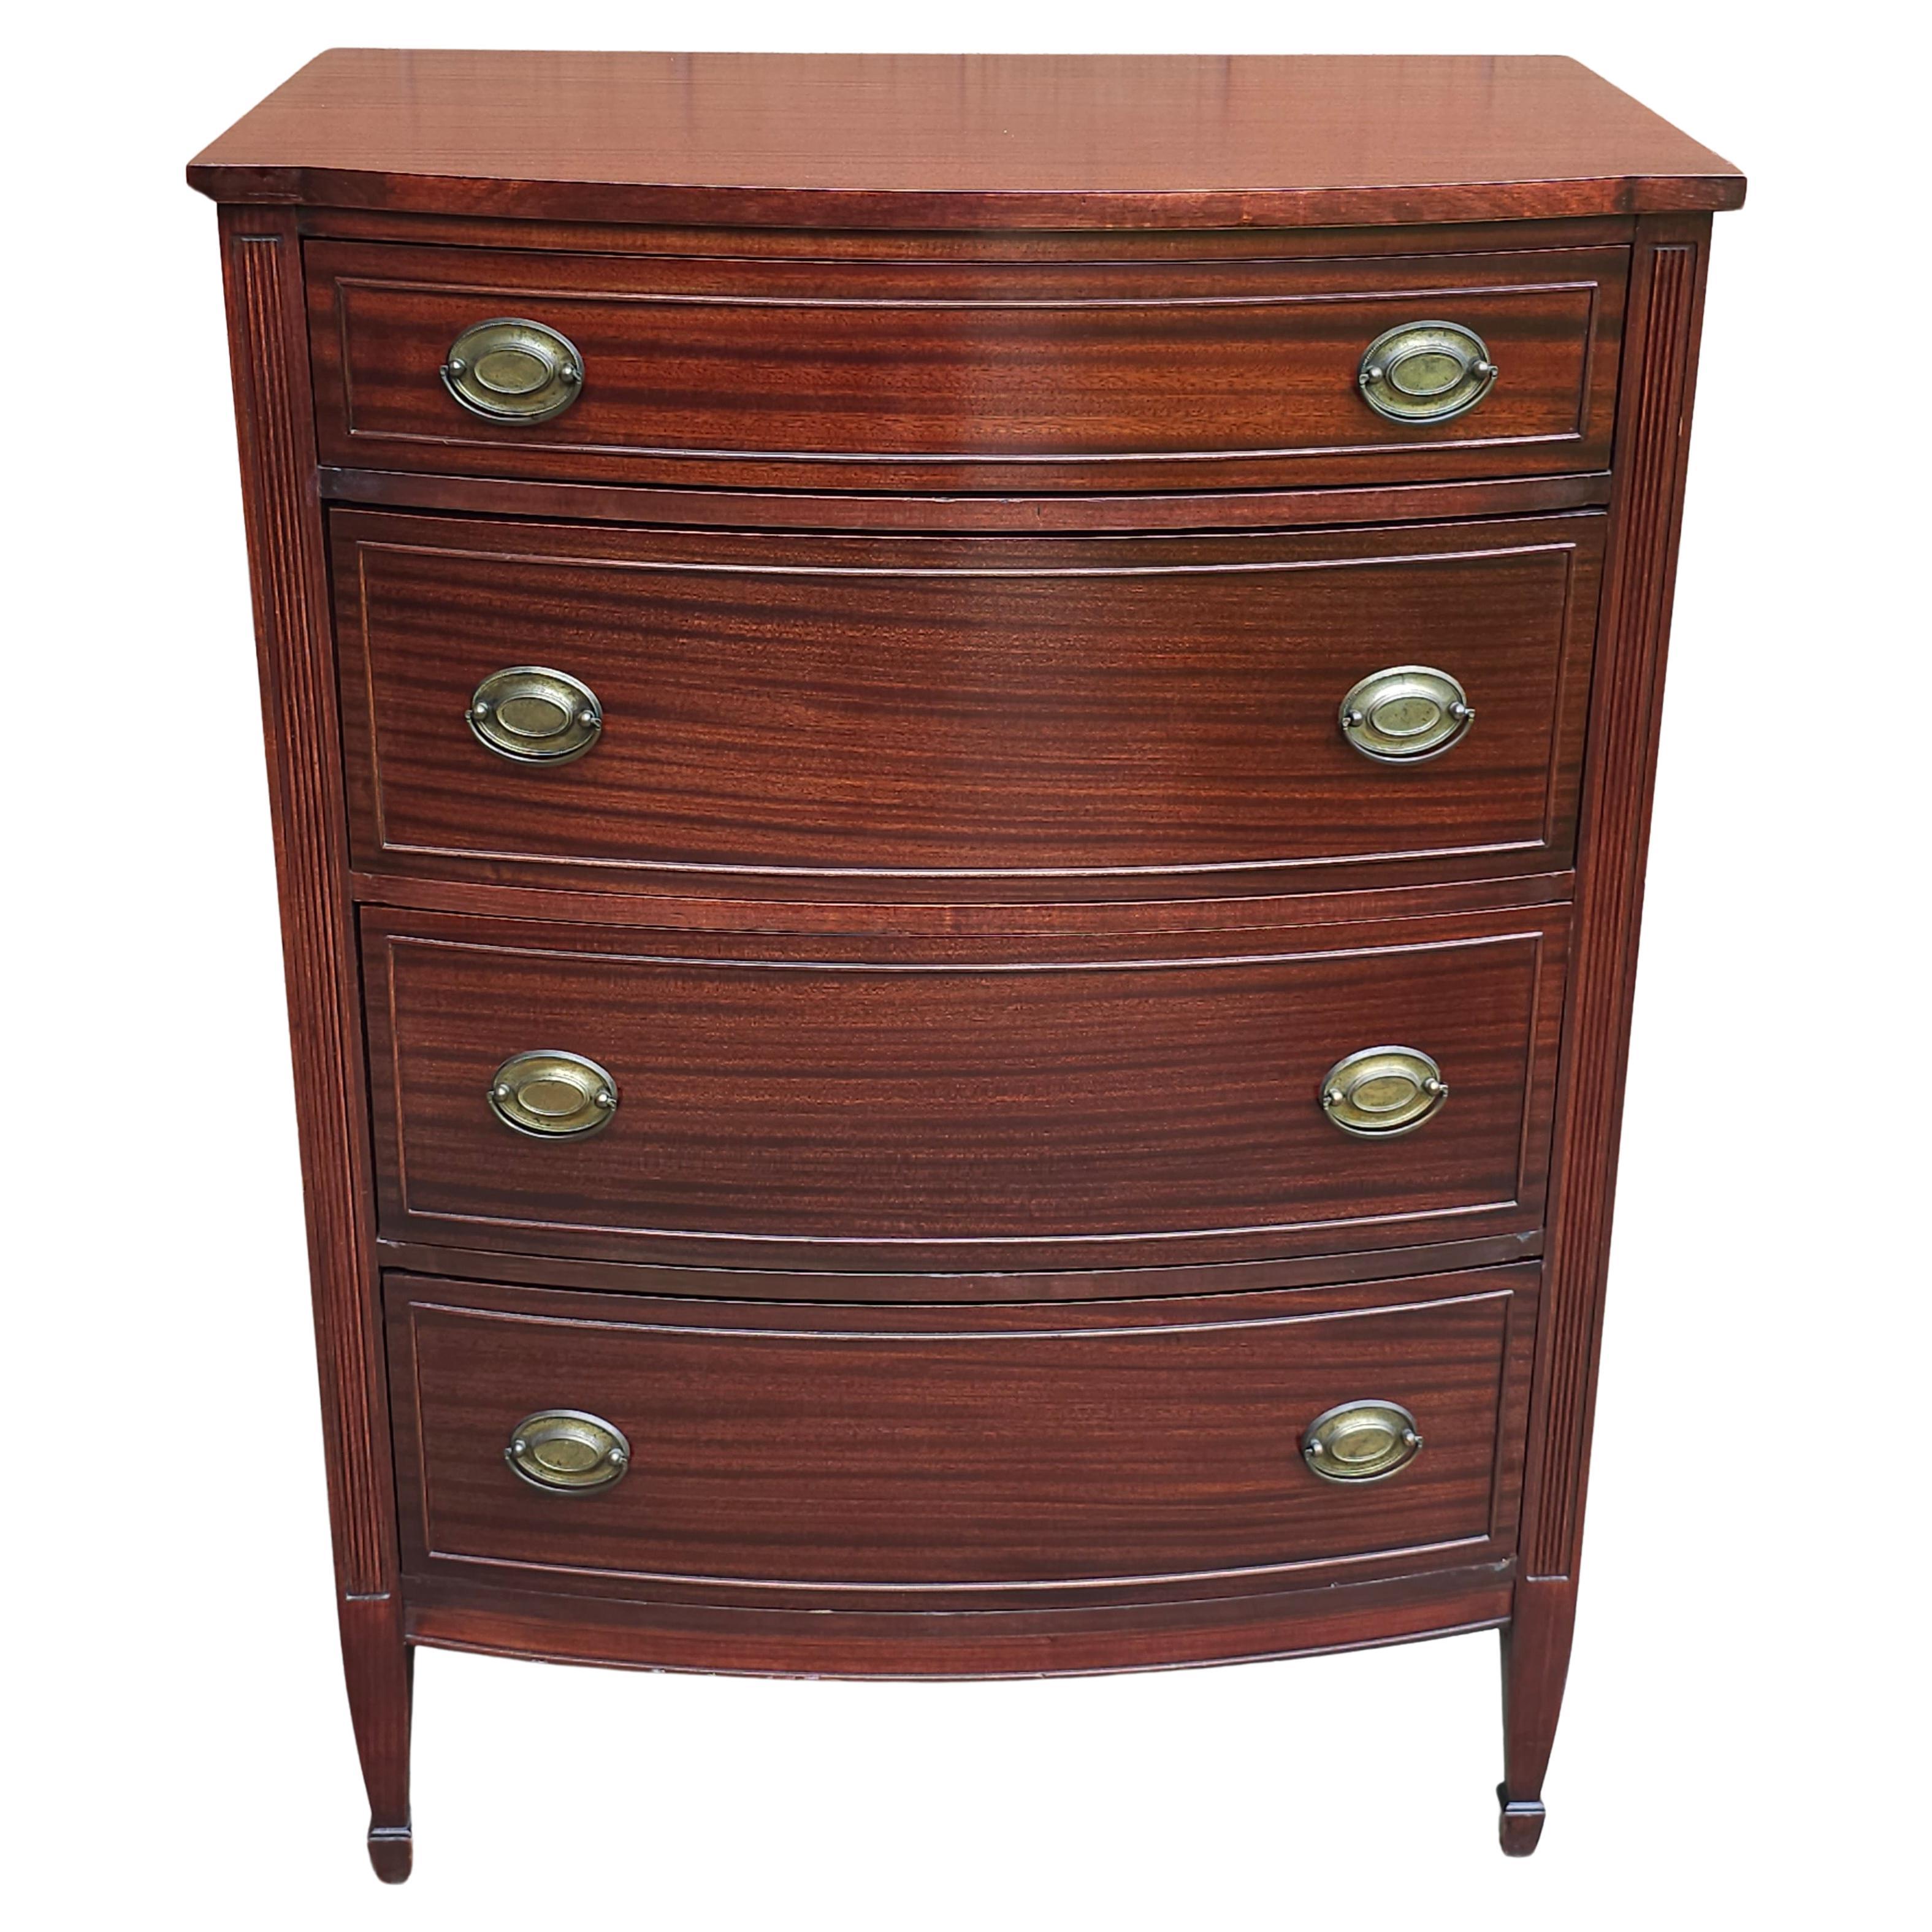 Mid 20th Century Federal Hepplewhite Style Mahogany Chest of Drawers For Sale